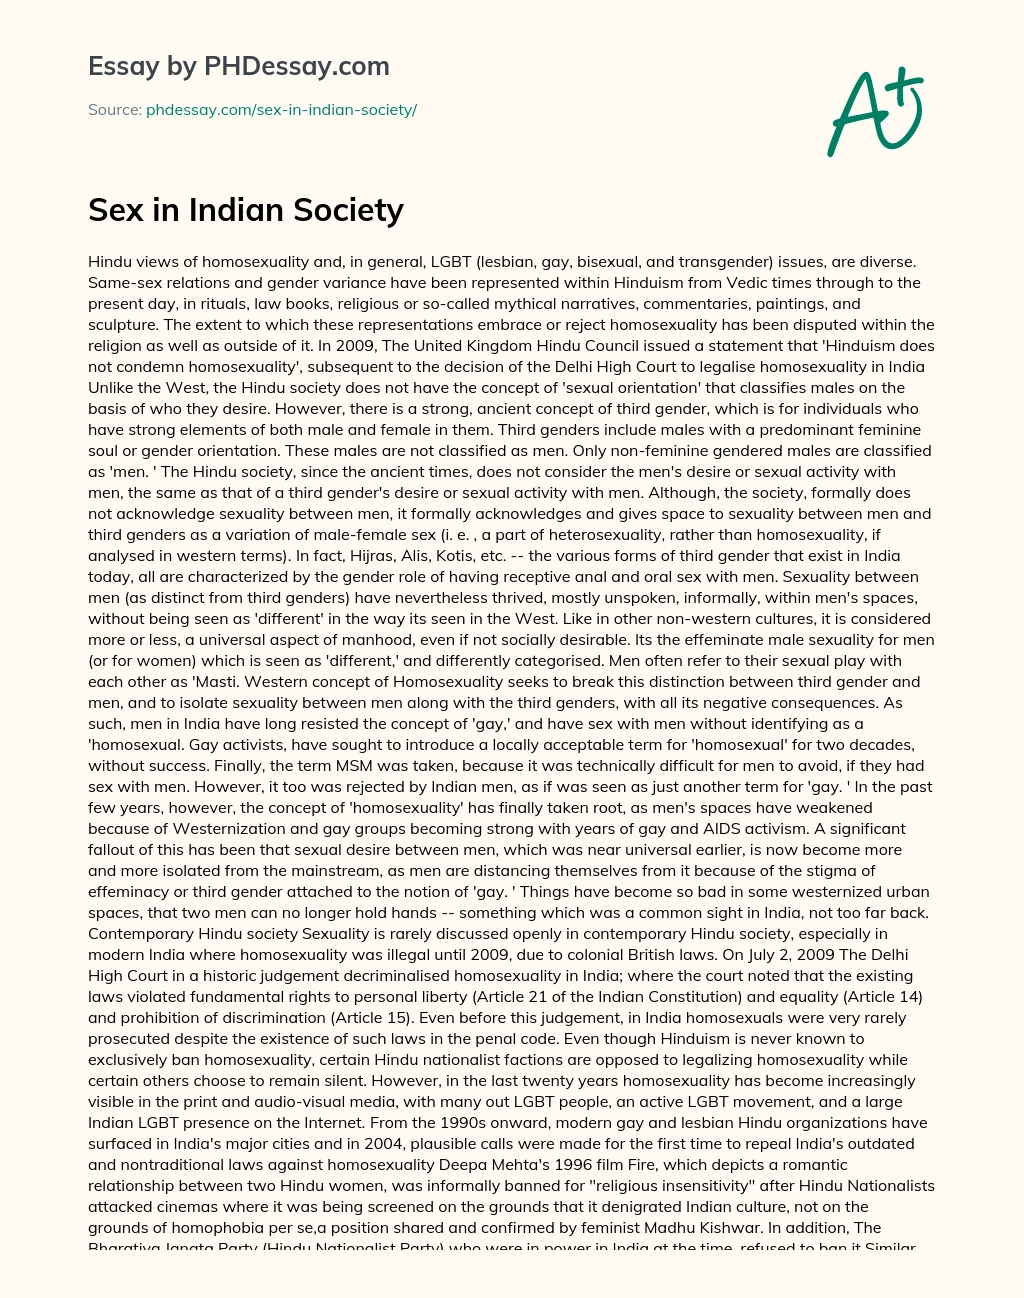 Sex in Indian Society essay